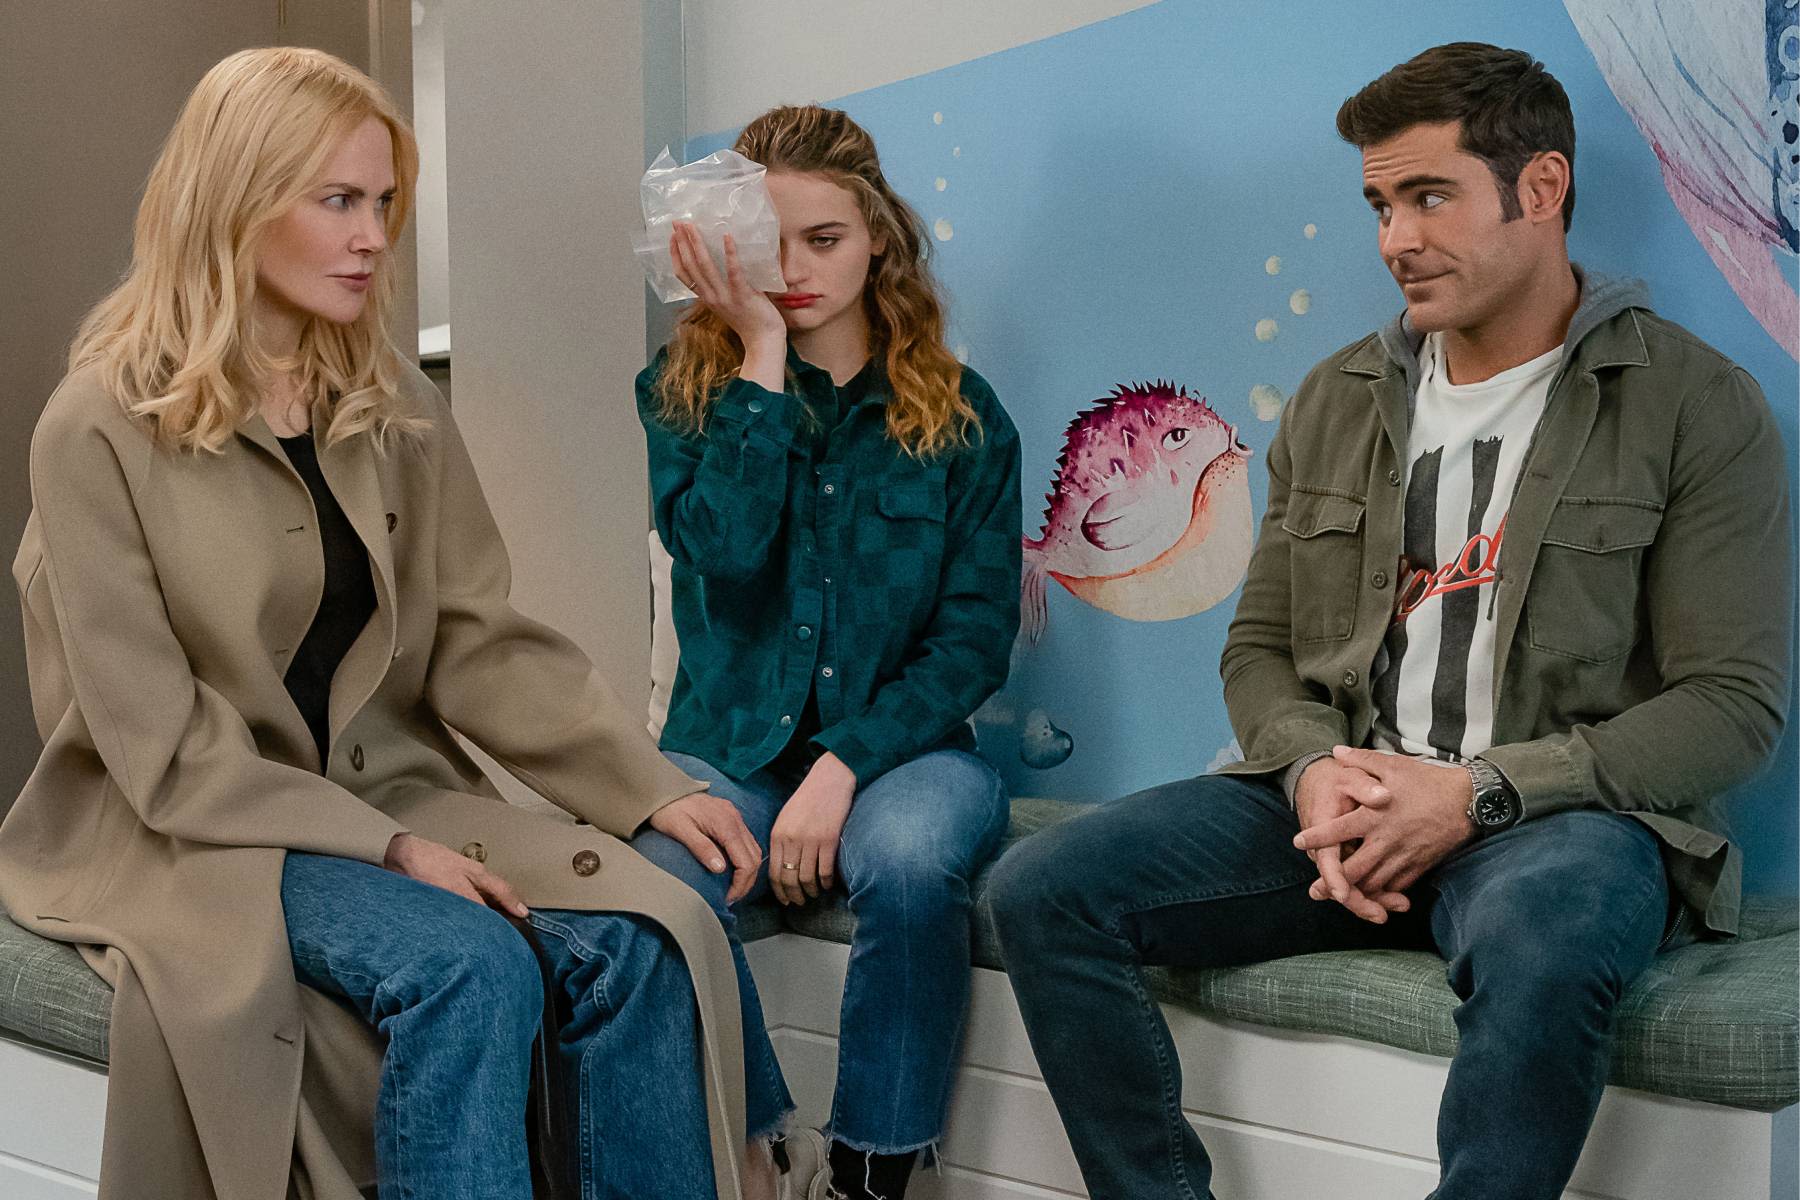 A ‘Self-Absorbed’ Zac Efron Falls for His Assistant’s Mom, Nicole Kidman, in ‘Family Affair’ Trailer